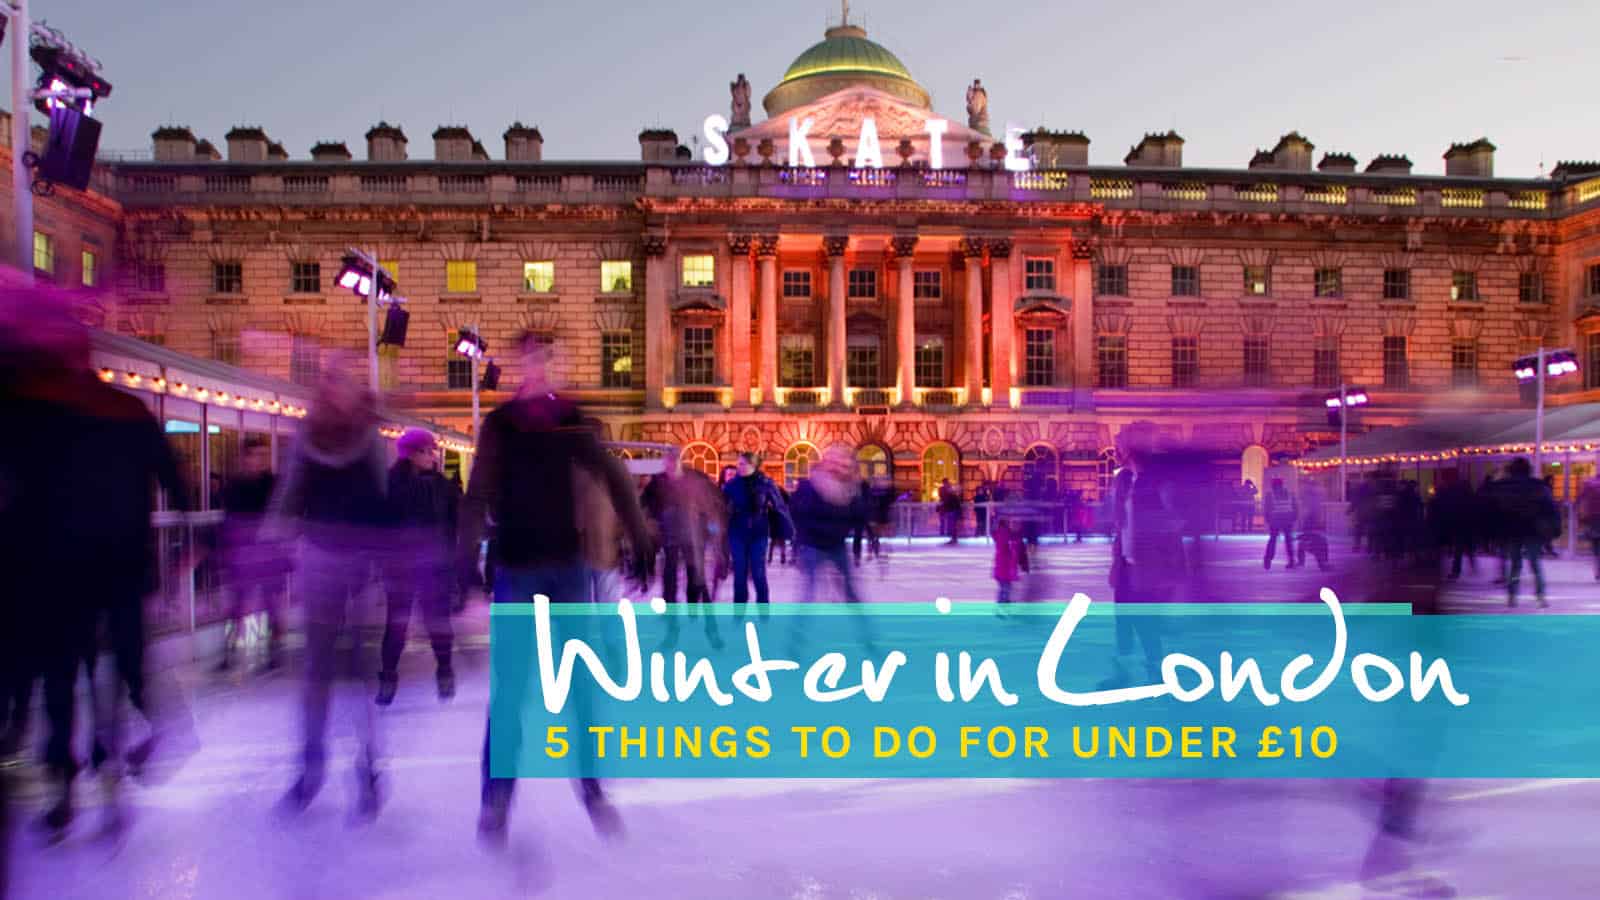 WINTER IN LONDON: 5 Things to Do for Under £10